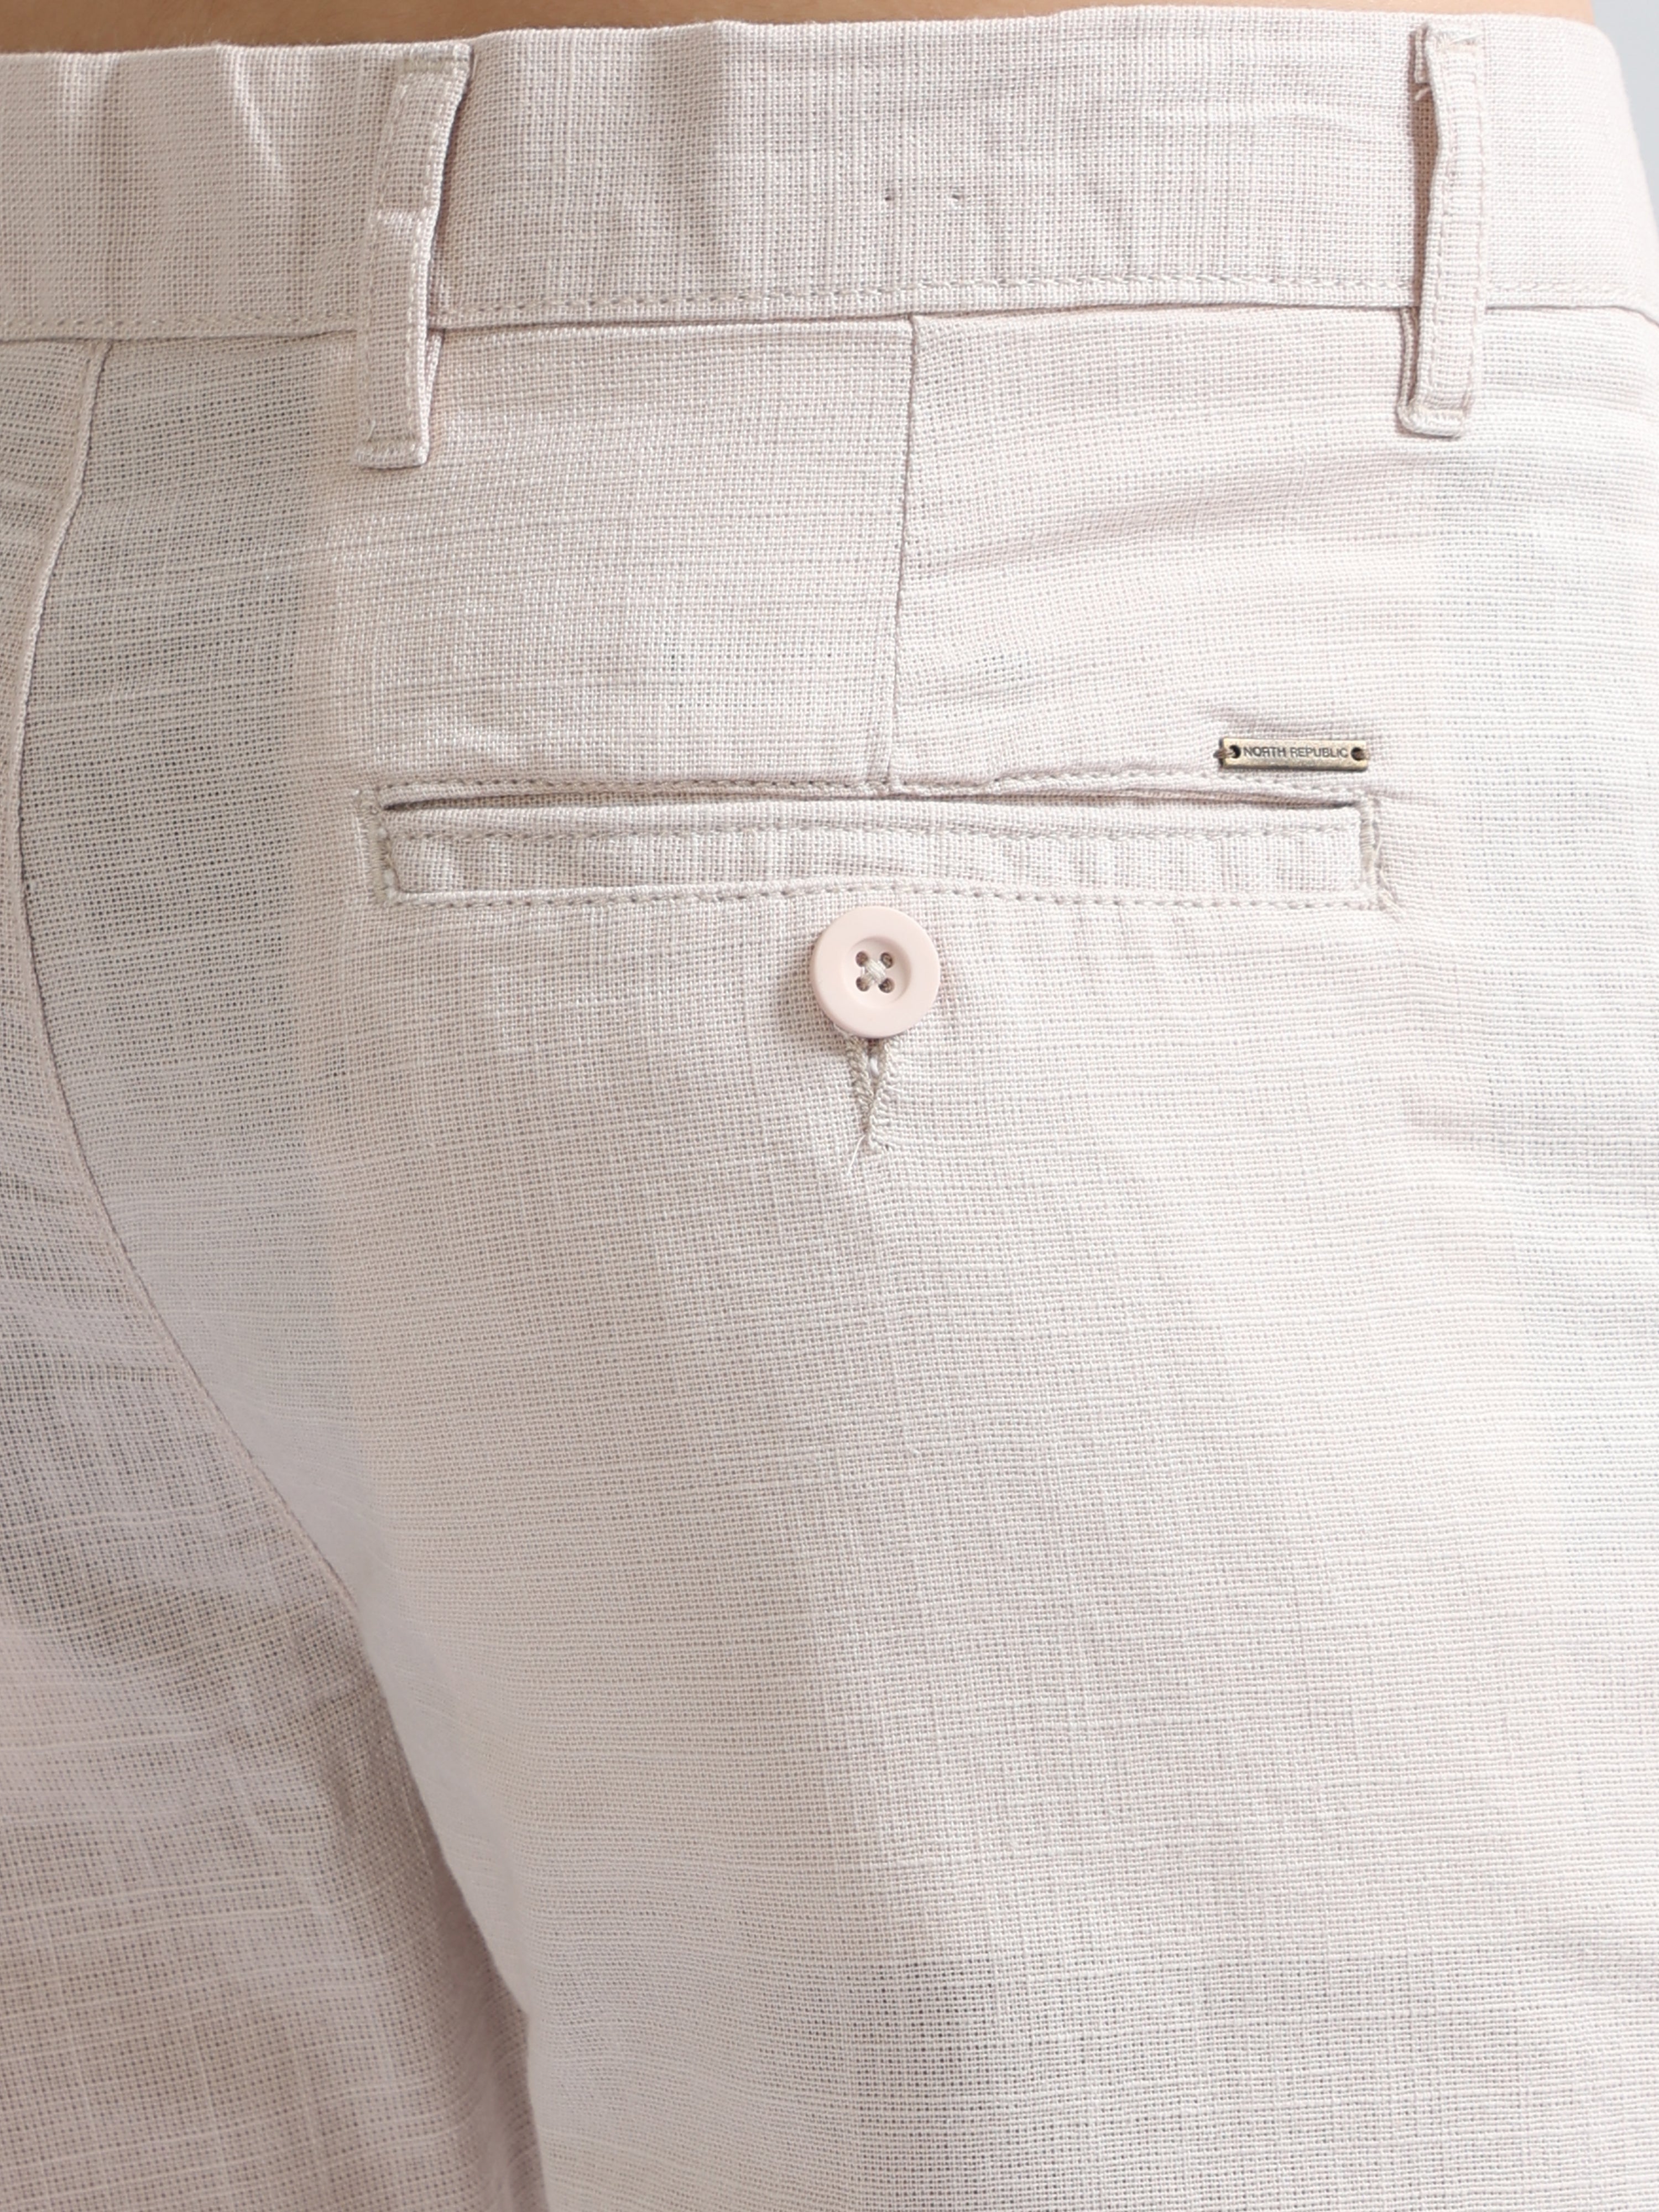 Buy Gap High Waisted Linen Cotton Blend Trousers from the Gap online shop